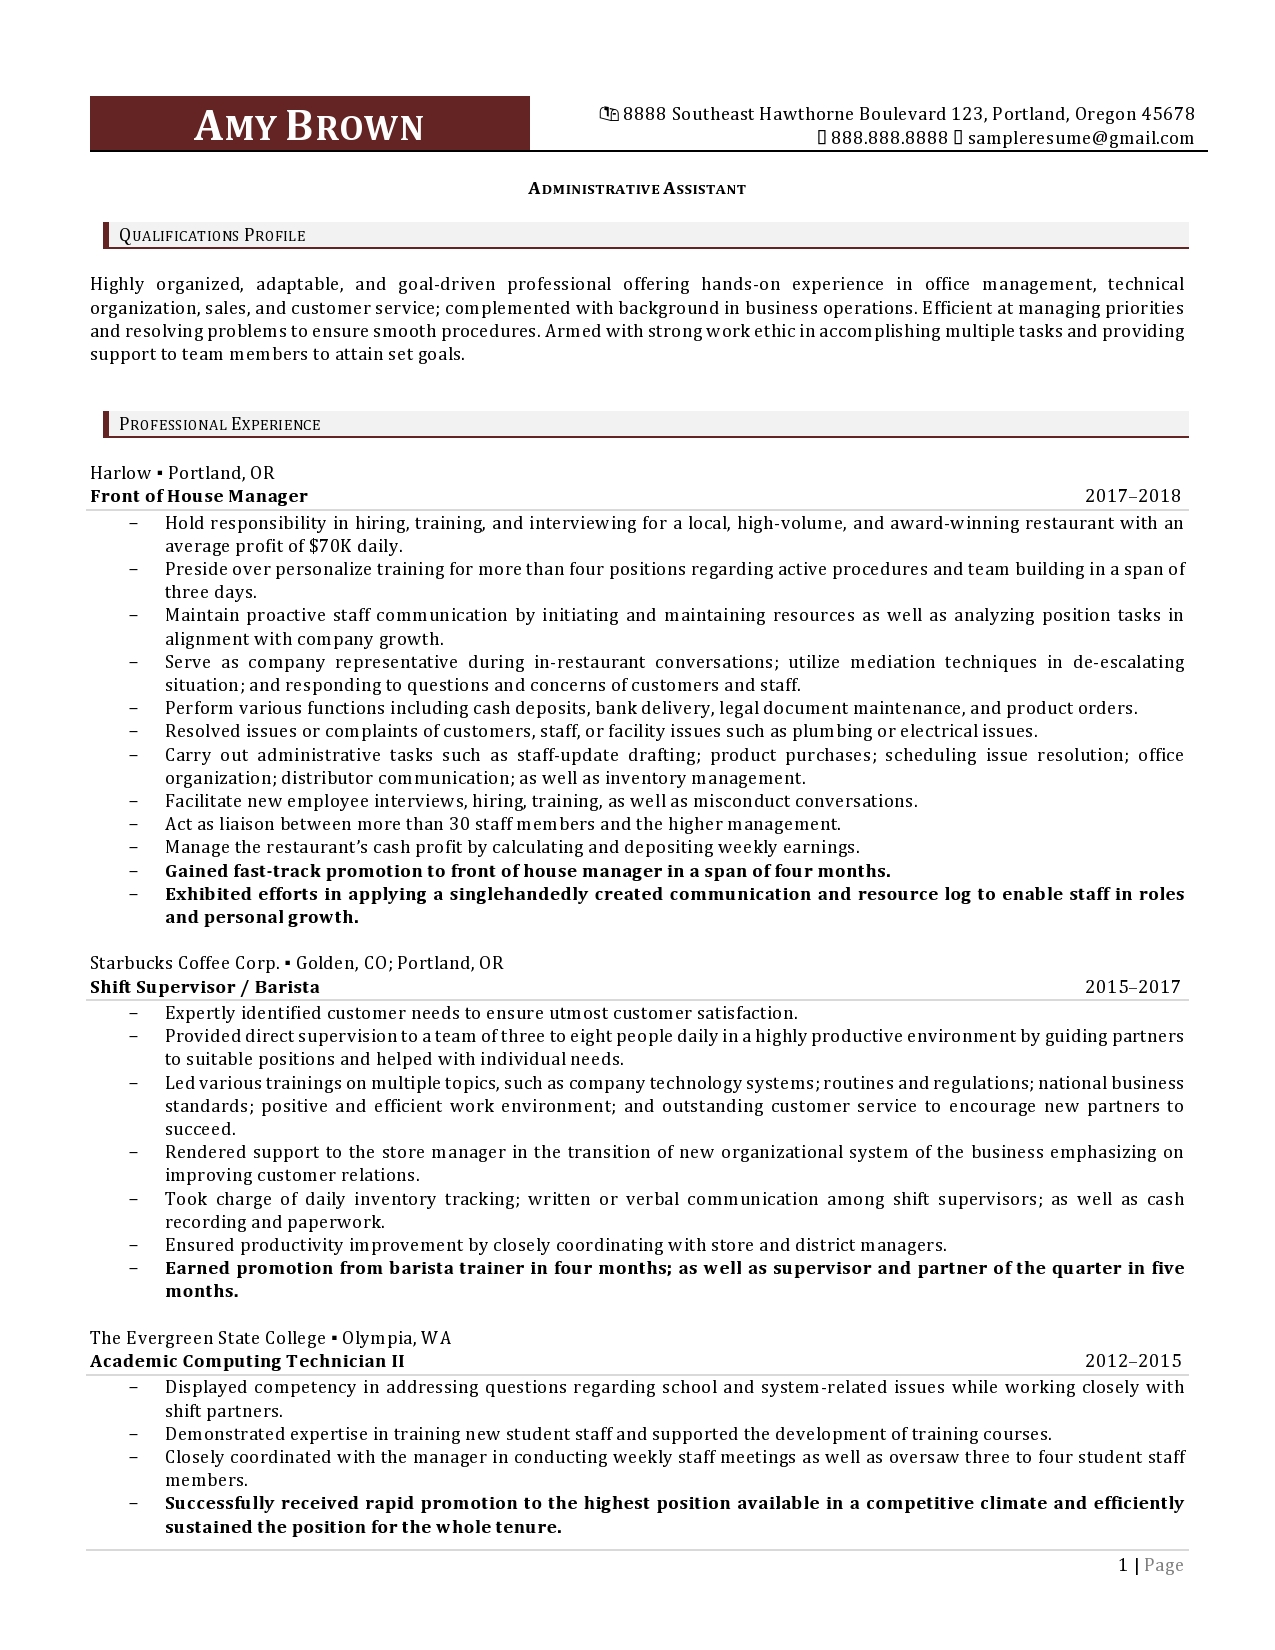 Administrative Assistant Resume Example Resume Professional Writers